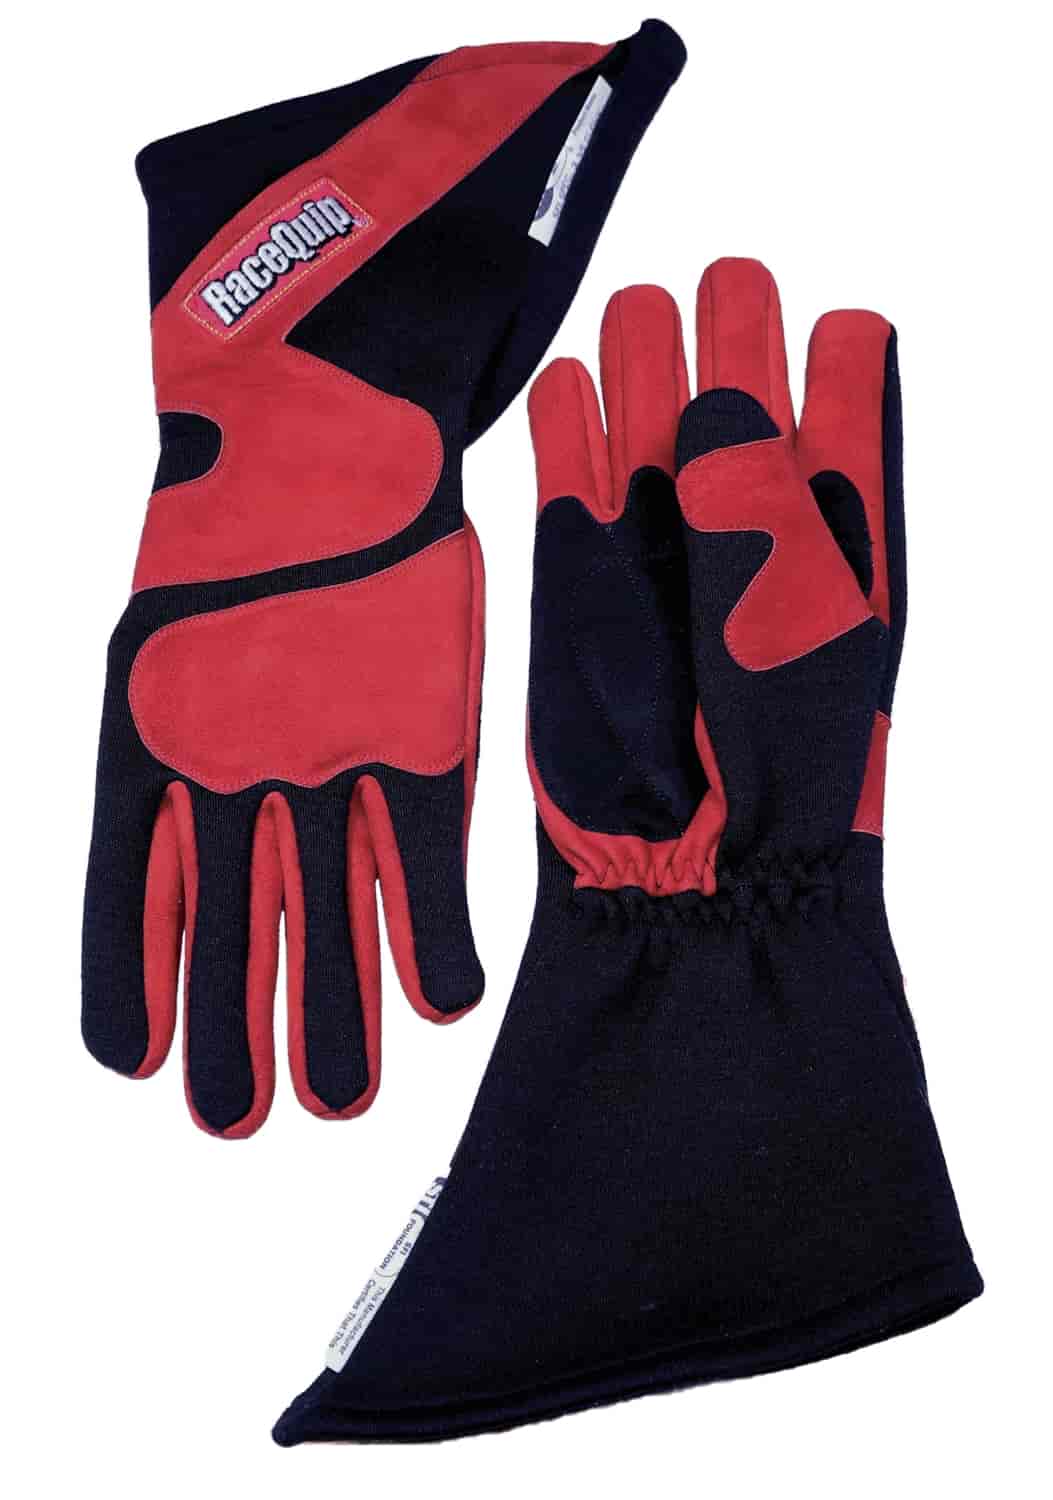 SFI-5 358 Series Long Angle Cut Driving Gloves Red/Black Large